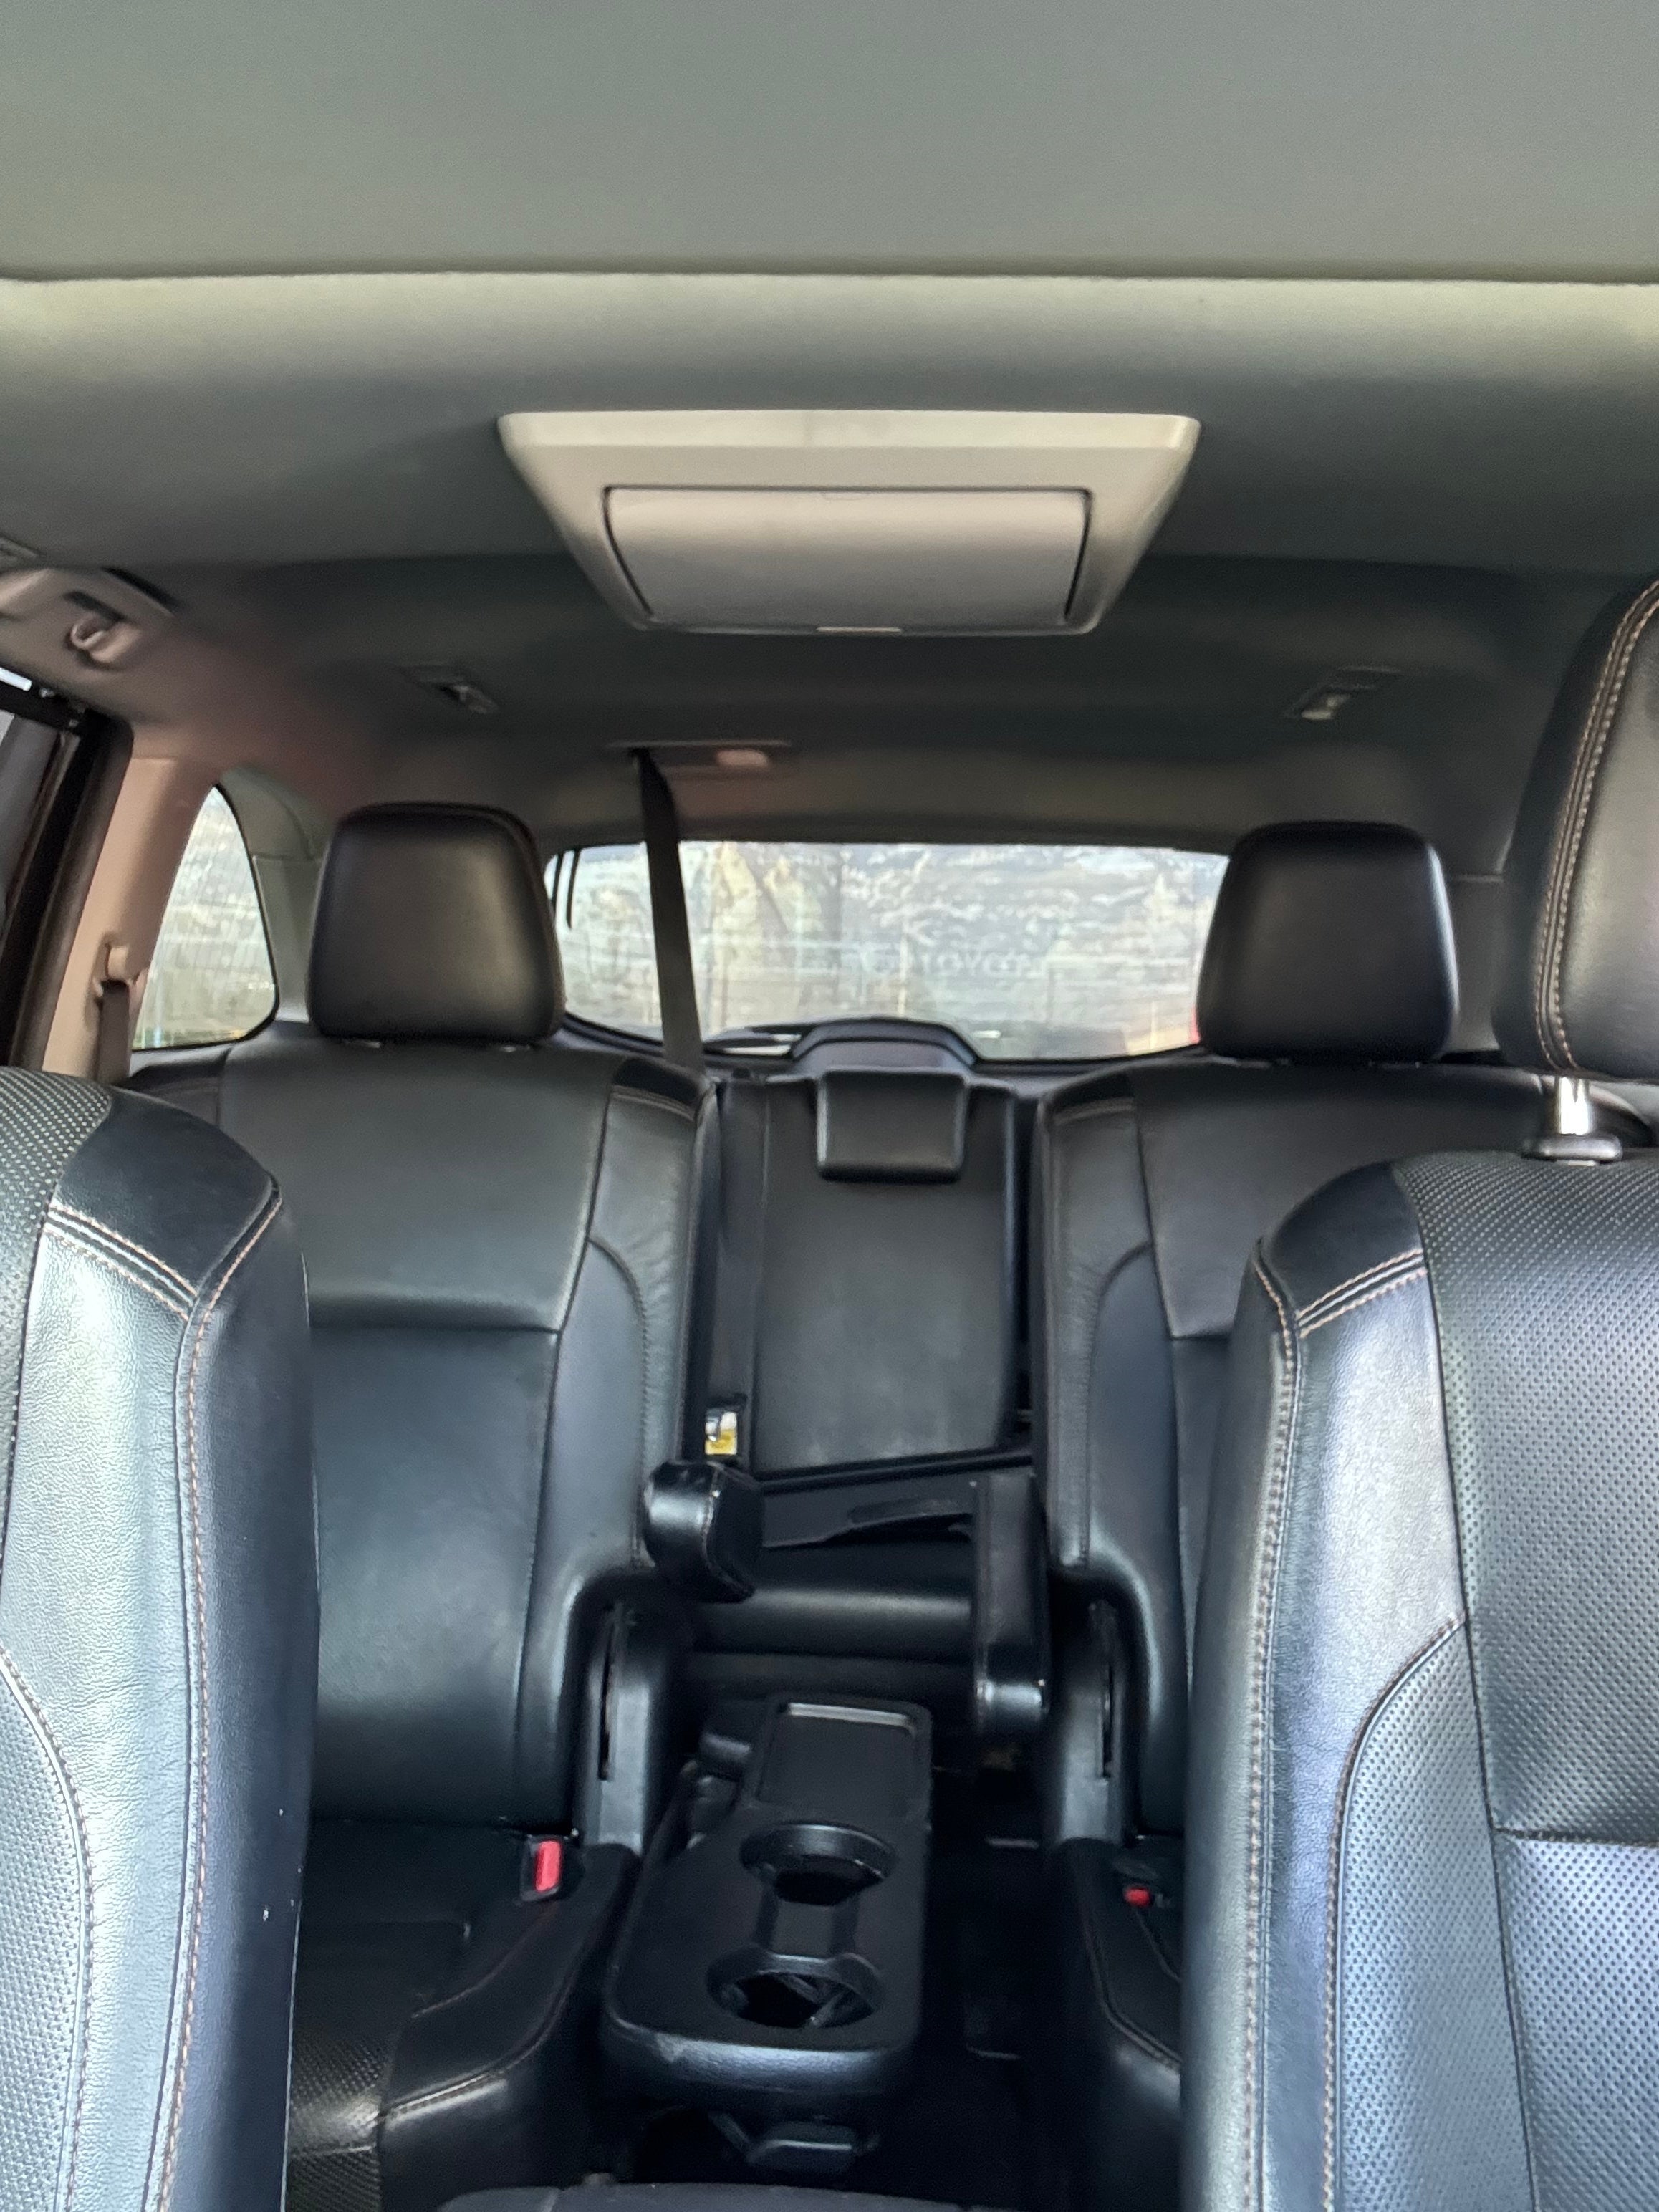 2019 Toyota Highlander LIMITED PANORAMIC ROOF, V6, 3.5L, 270 CP, 5 PUERTAS, AUT